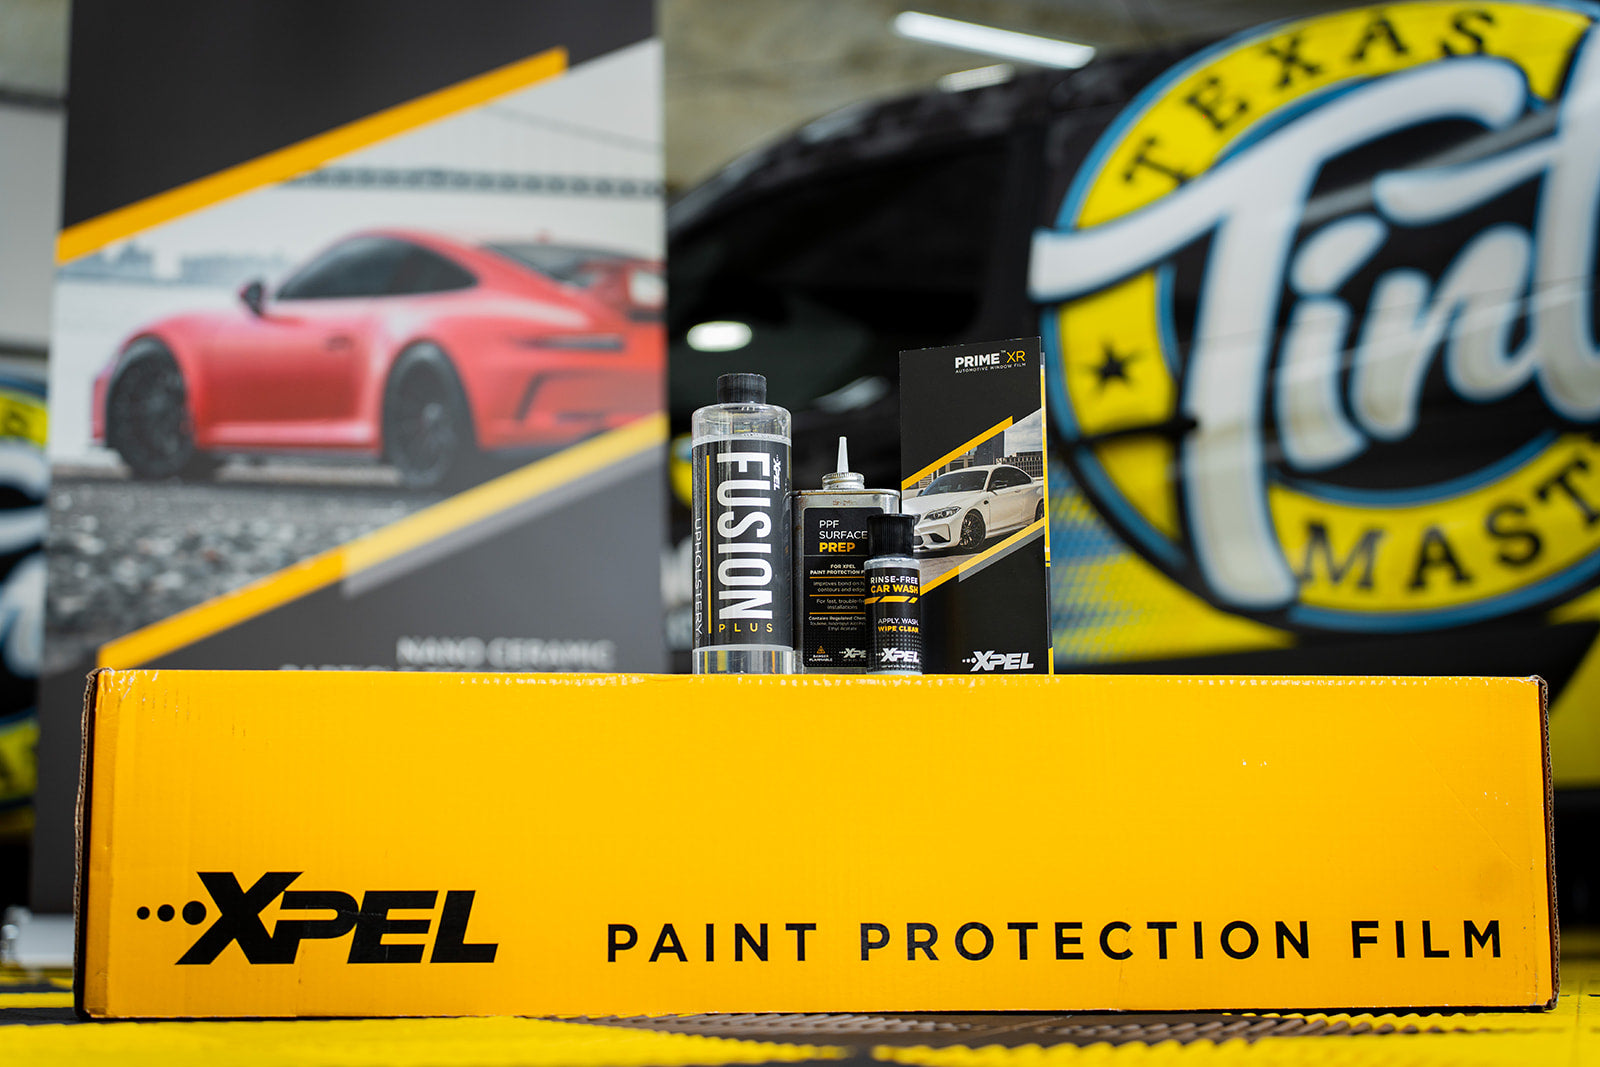 Full front Xpel Paint Protection Film. Keep that paint new! #mxautocare  #harrisonburg #detailing #detail #carwash #xpel #ceramicpro…